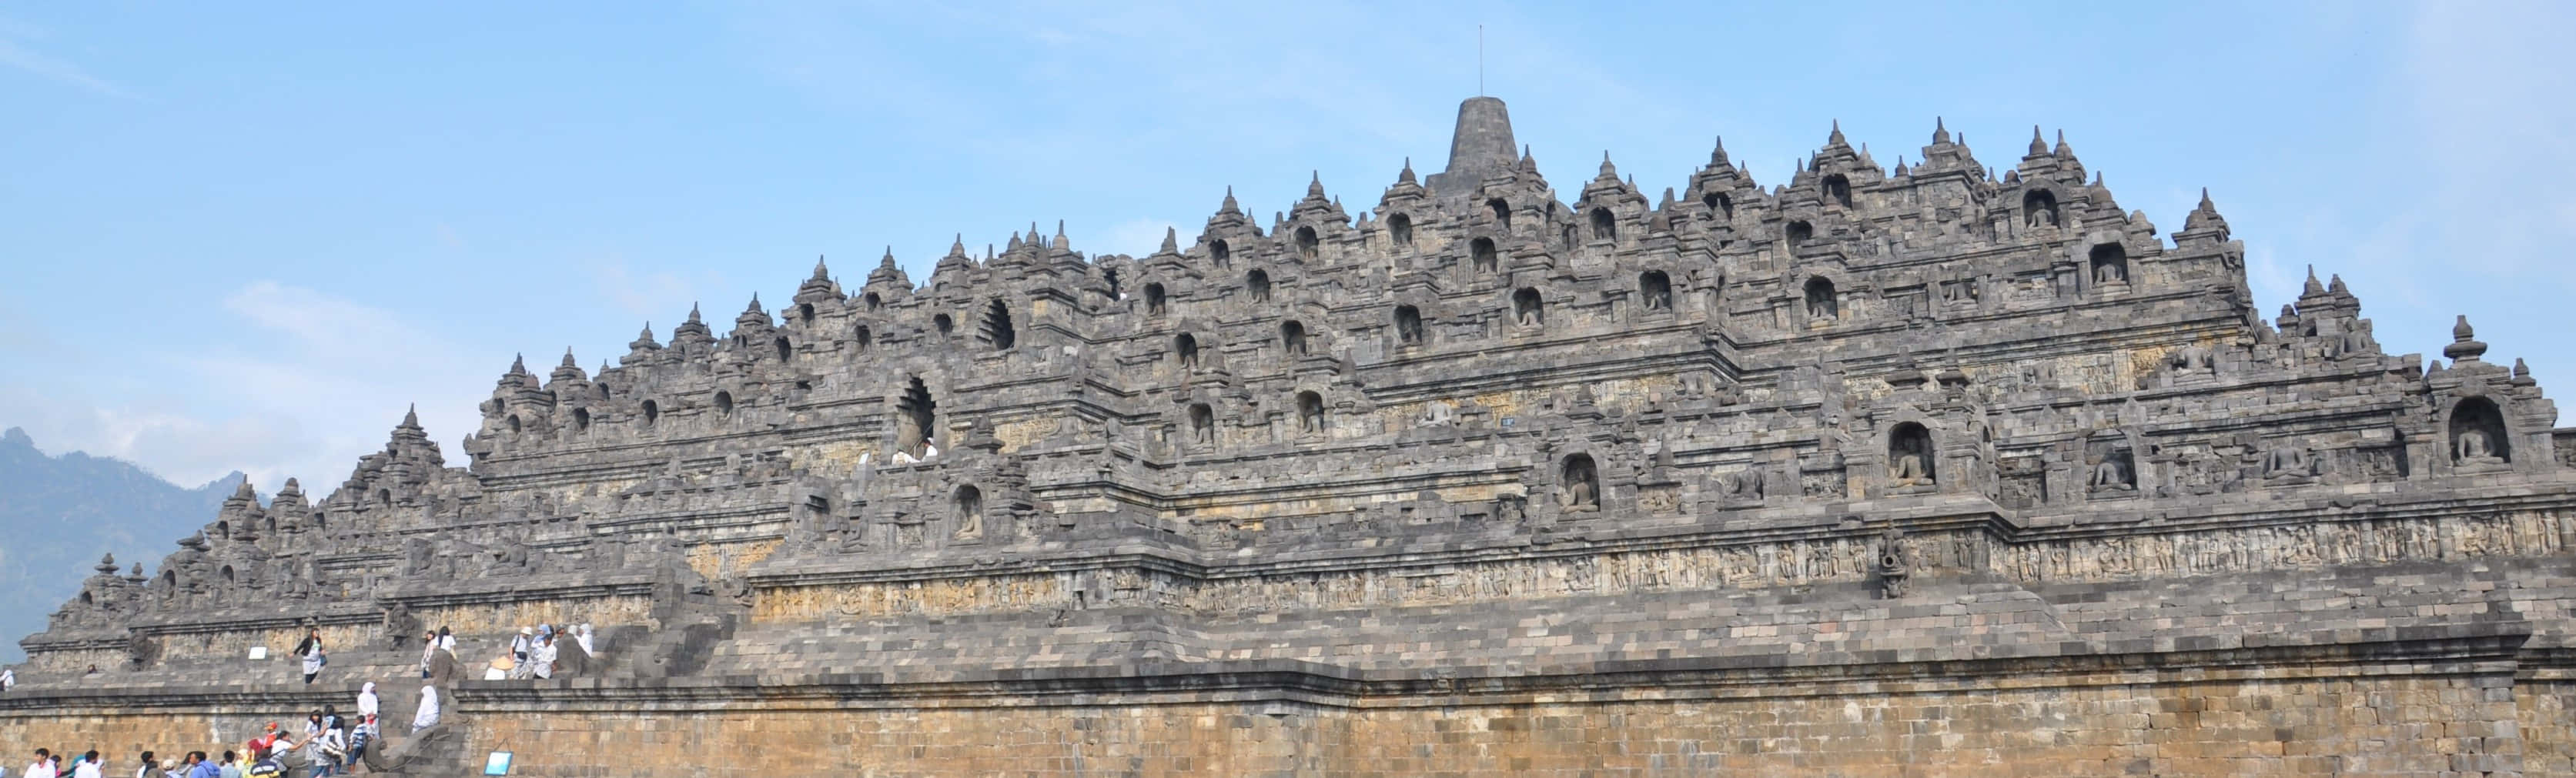 Borobudur Temple From A Distance Wallpaper